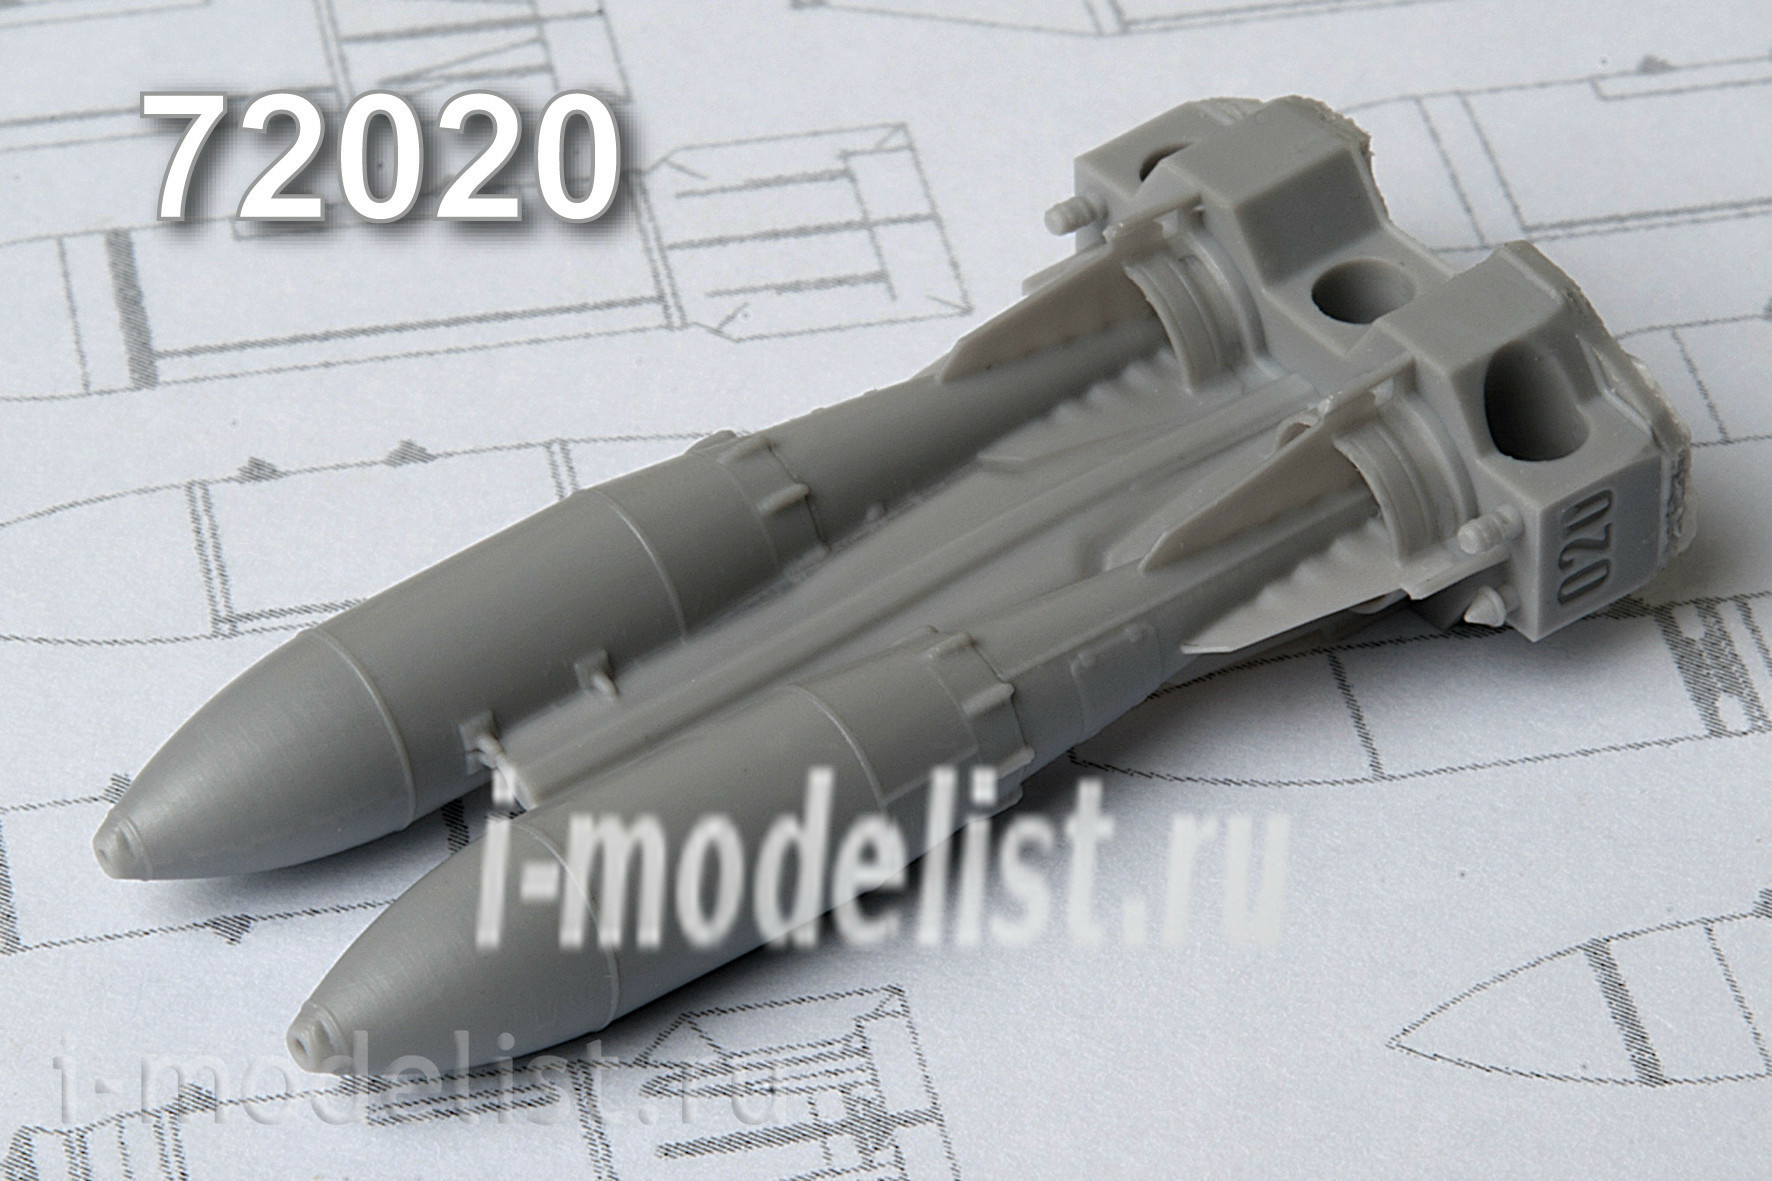 AMC72020 ADVANCED Modeling 1/72 FAB-500T high-explosive bomb caliber 500 kg (two bombs included)